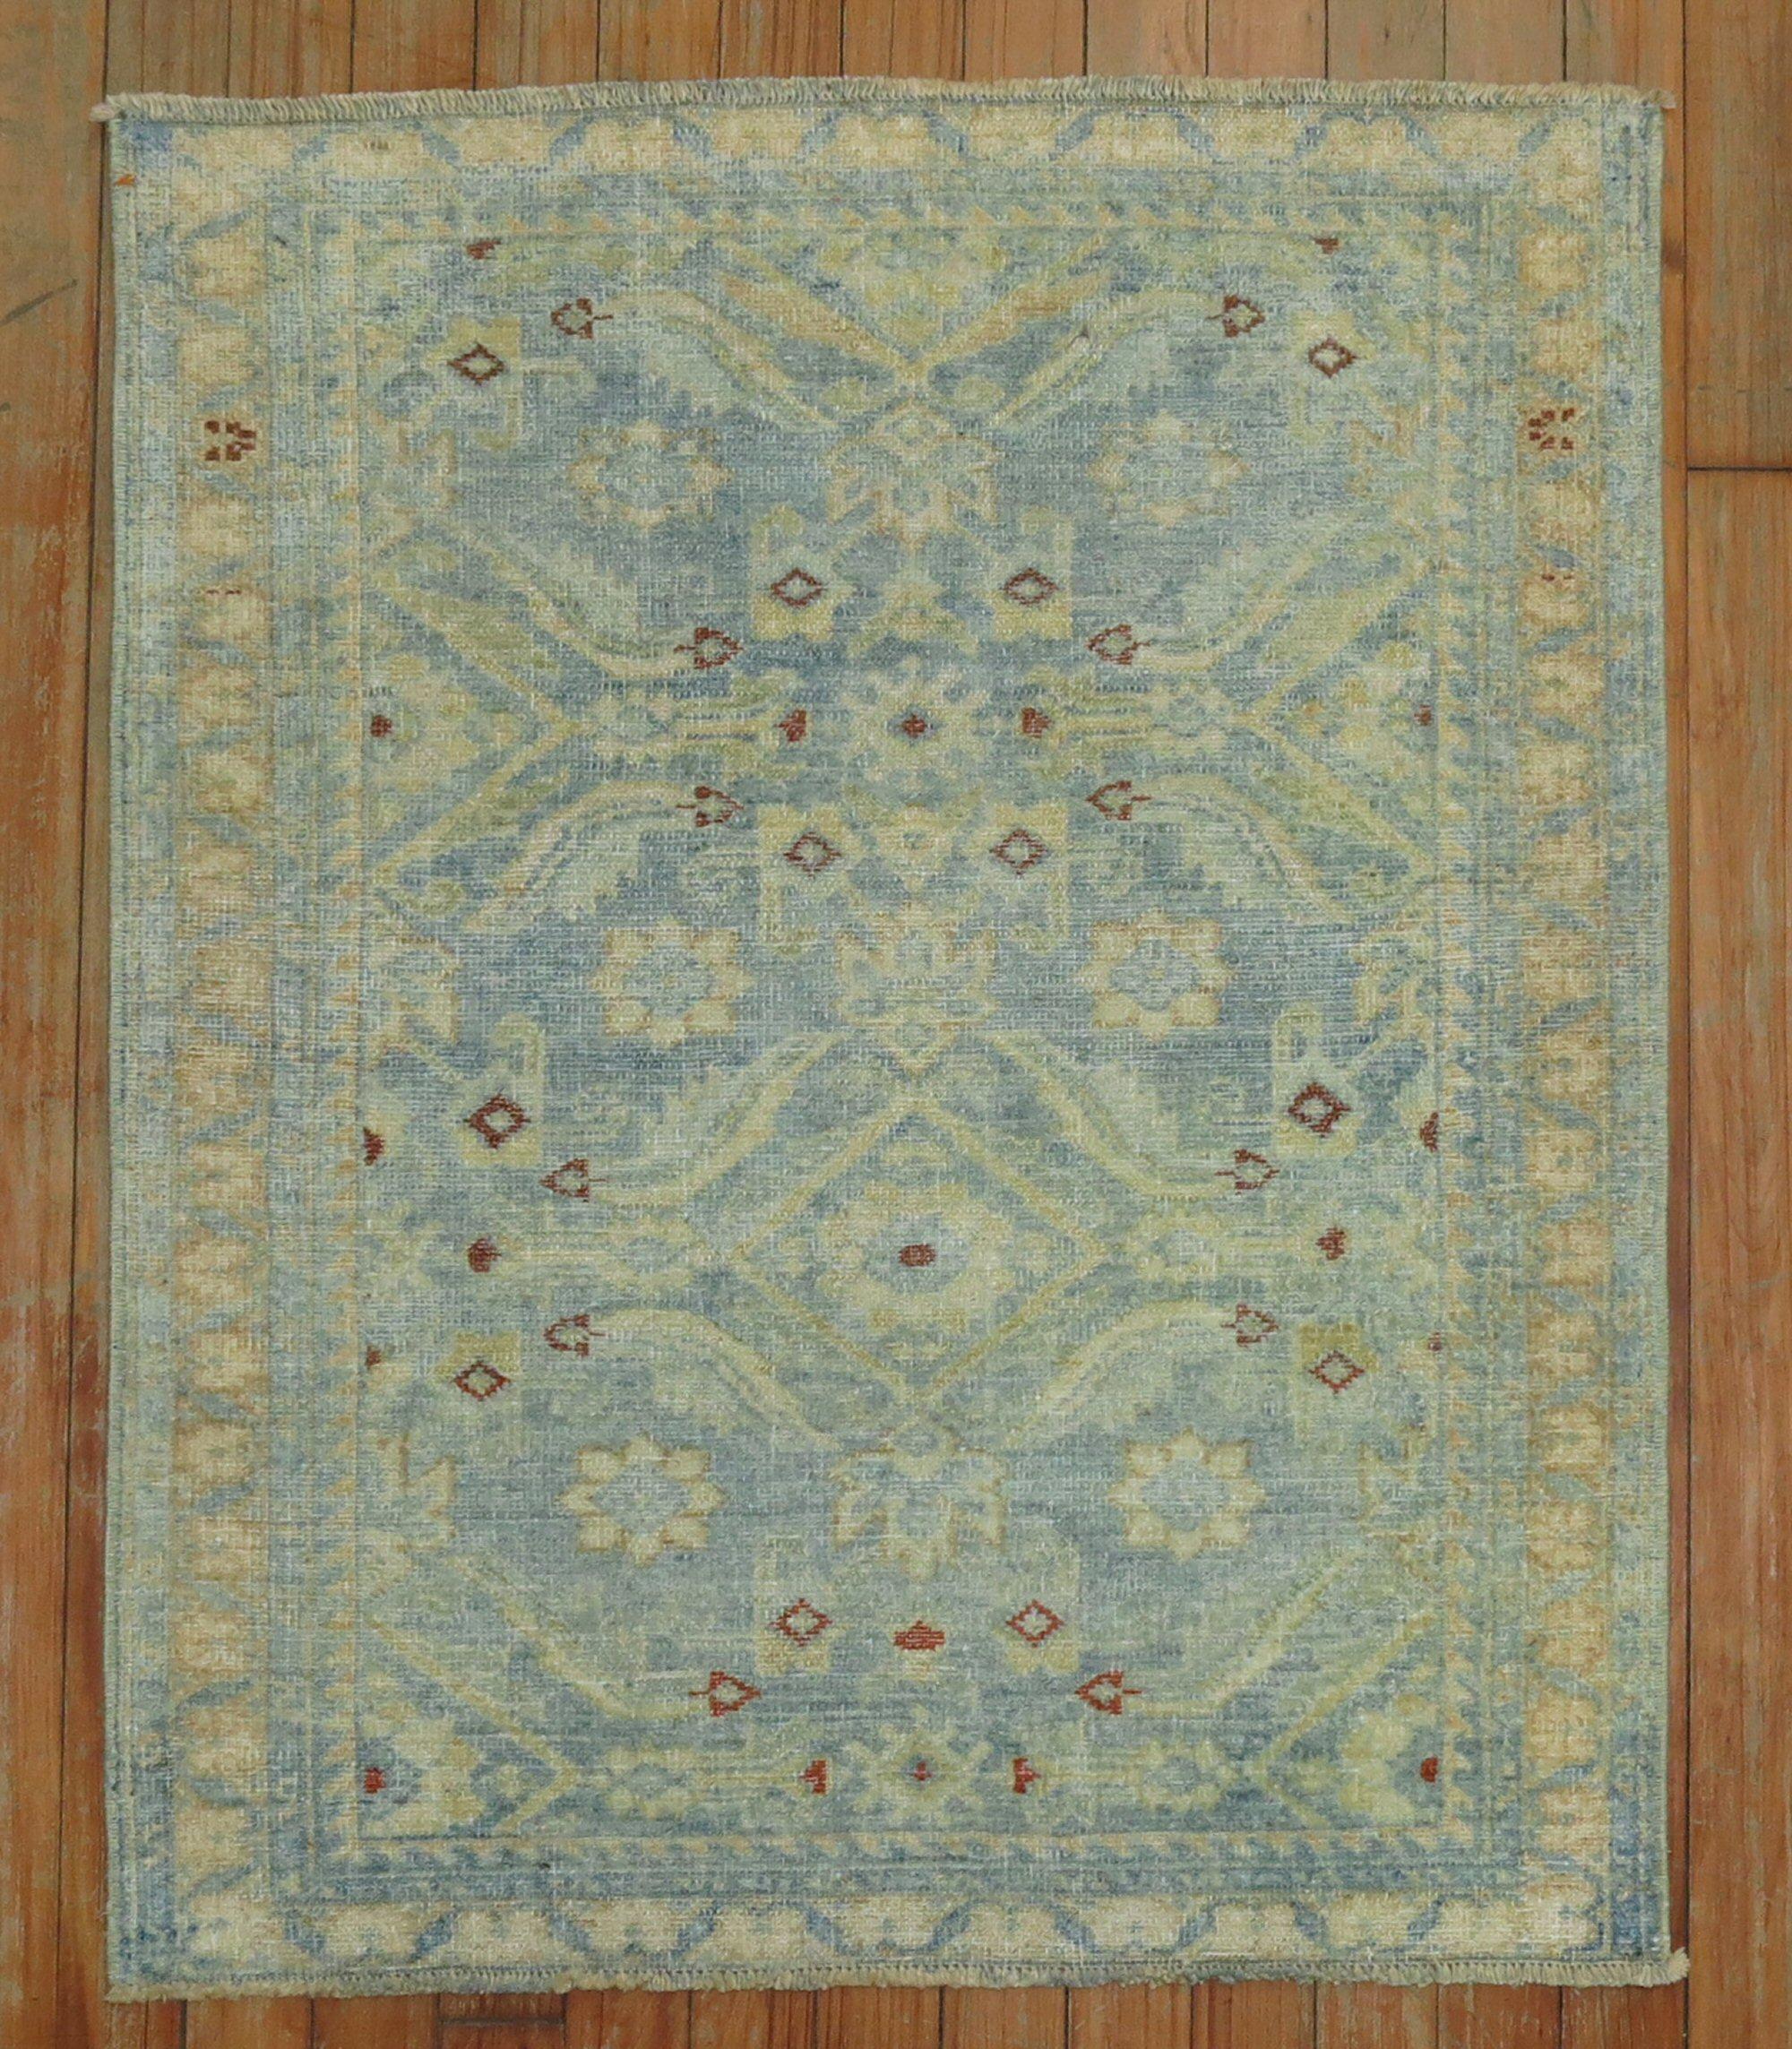 A small size early 20th century Persian Malayer rug in powder blue, ivory, and turquoise 

Measures: 2'5